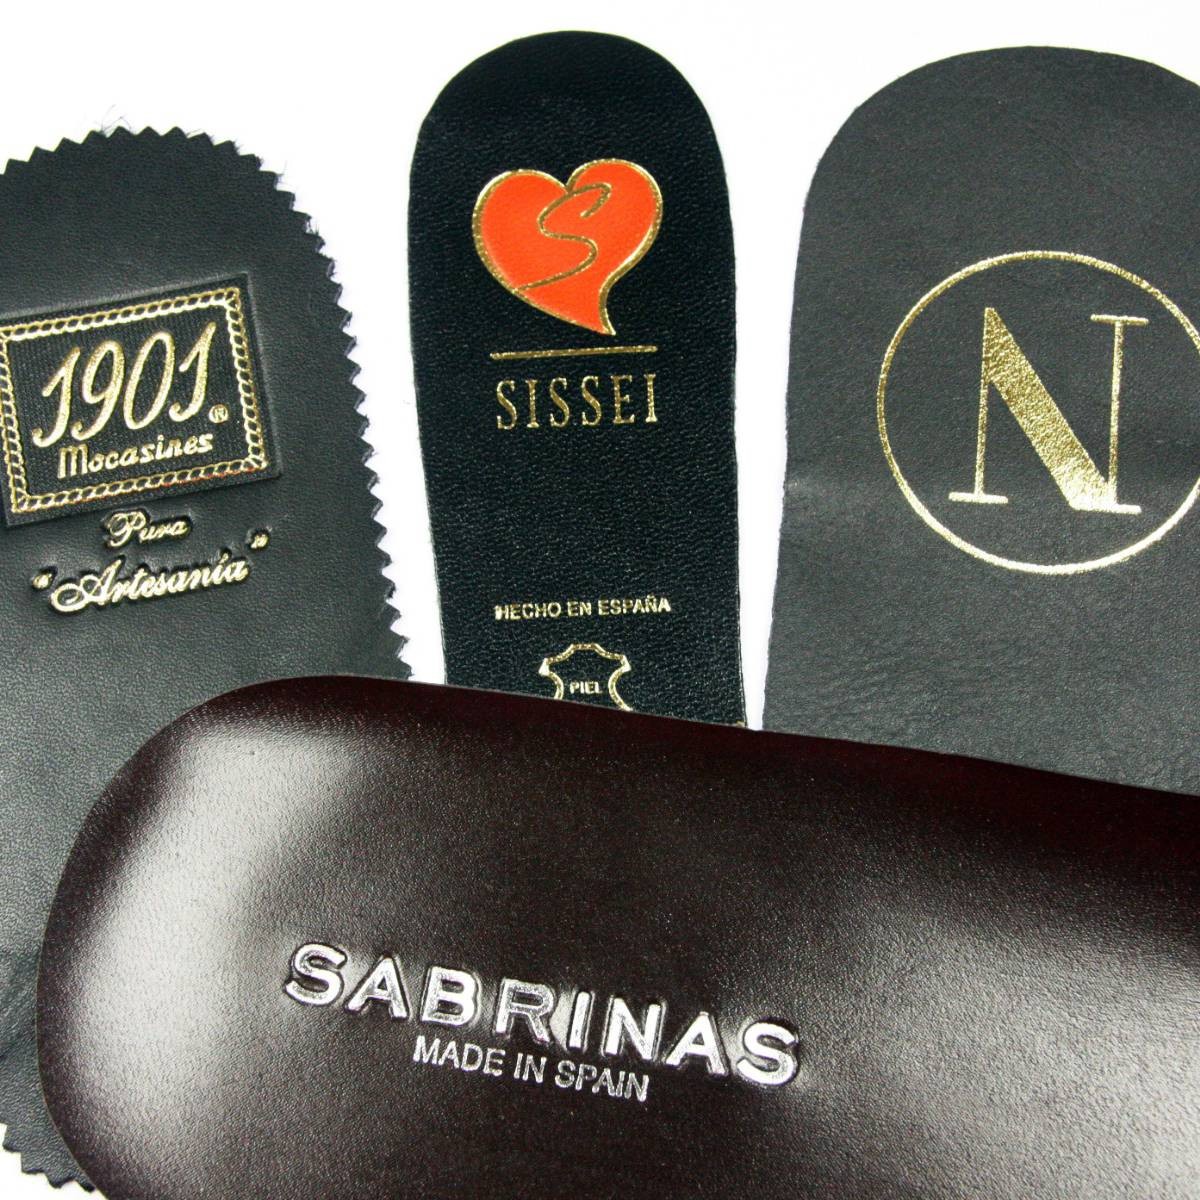 Footwear insole stamping: the easiest way to brand recognition